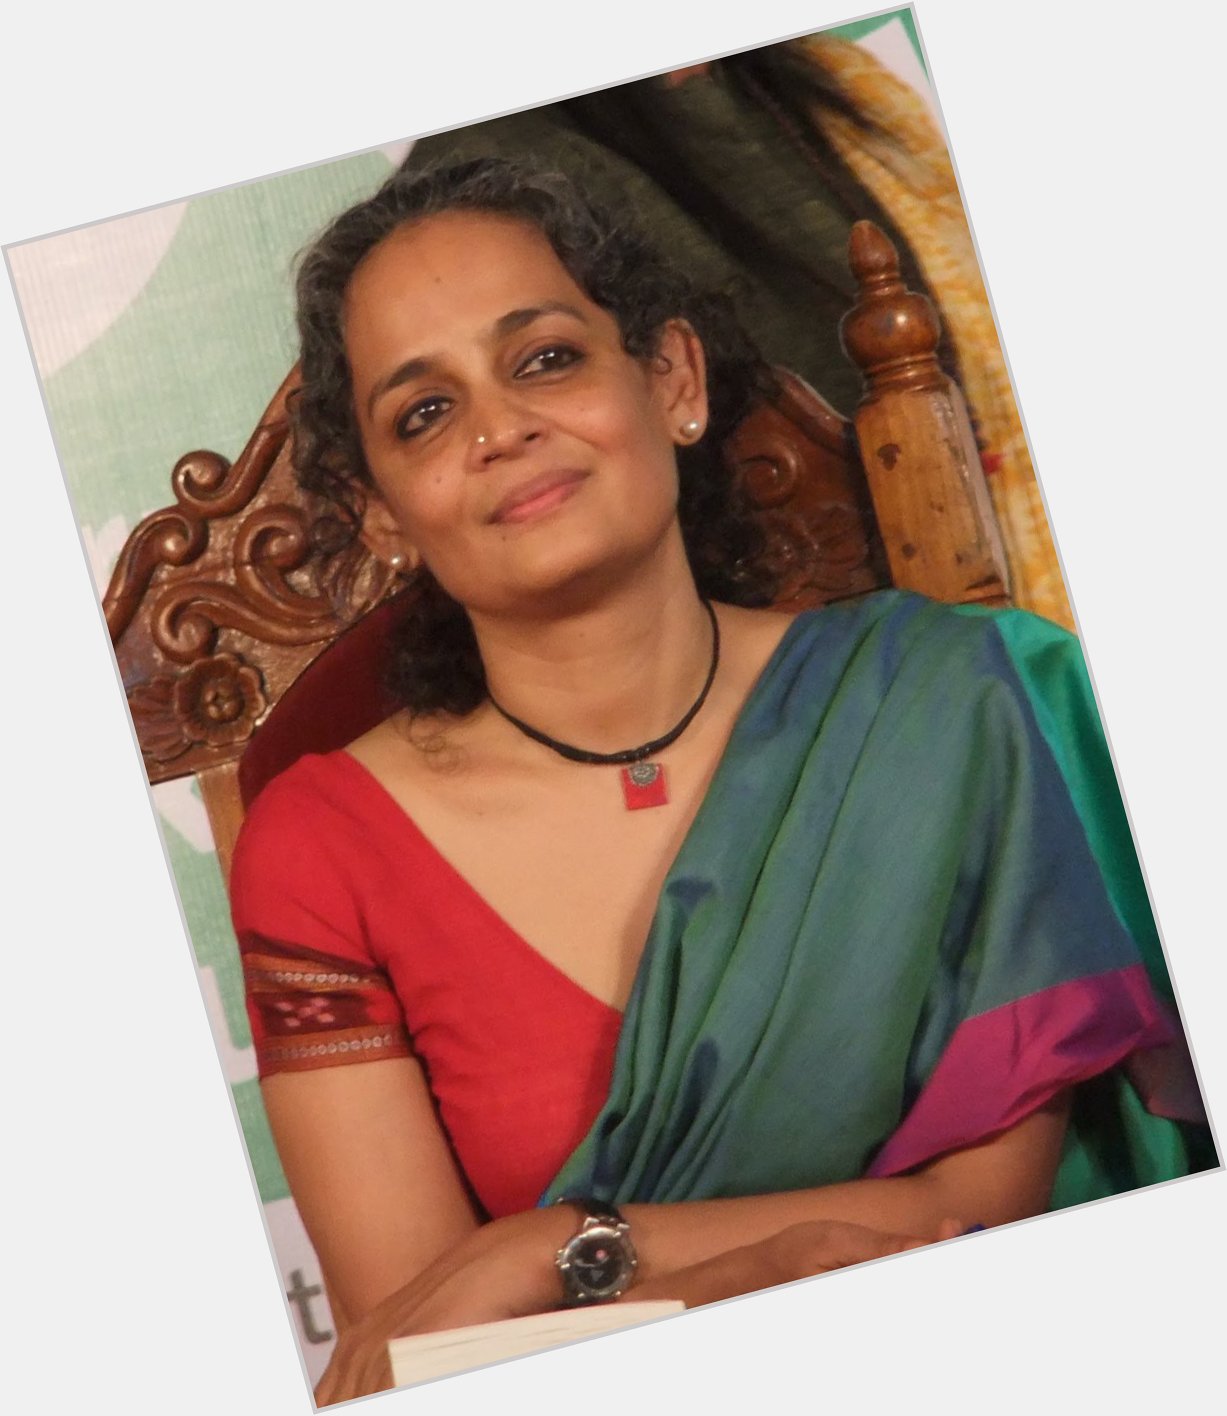  If you\re happy in a dream, does that count? Happy birthday Arundhati Roy Ma\am 